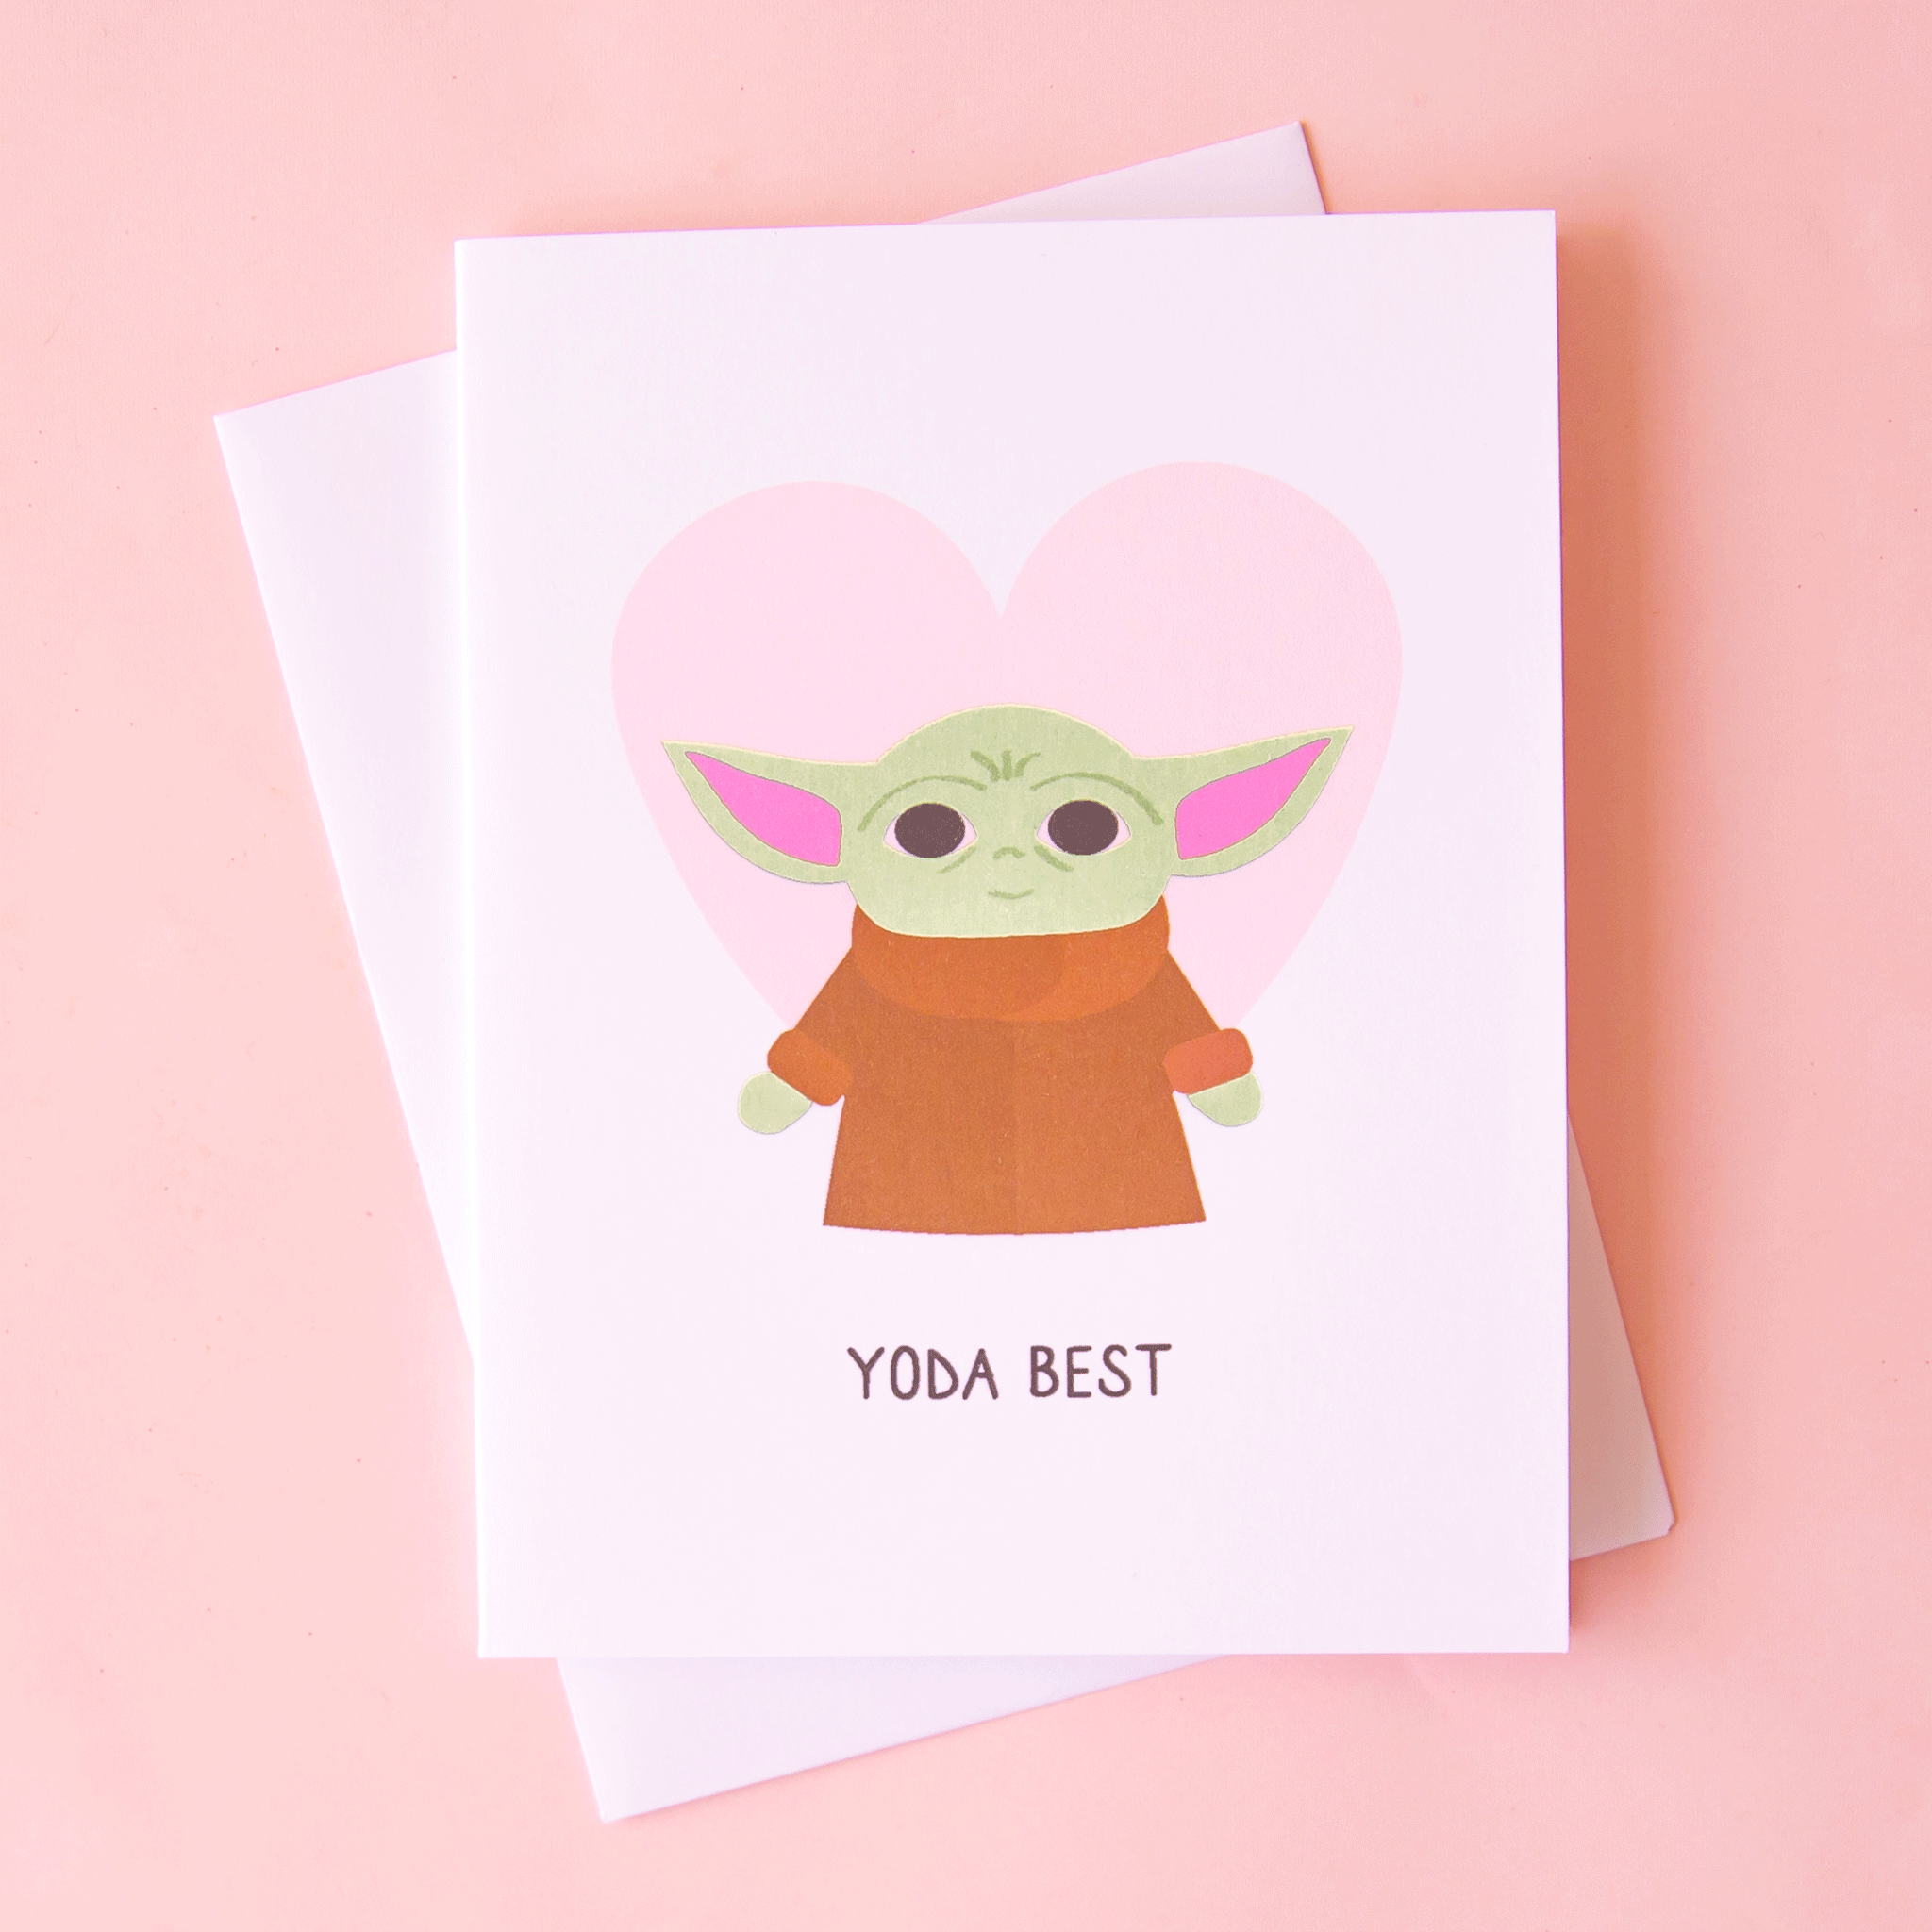 A white card with a light pink heart and a Yoda illustration in front along with black text that reads, "Yoda Best" along with a white envelope.